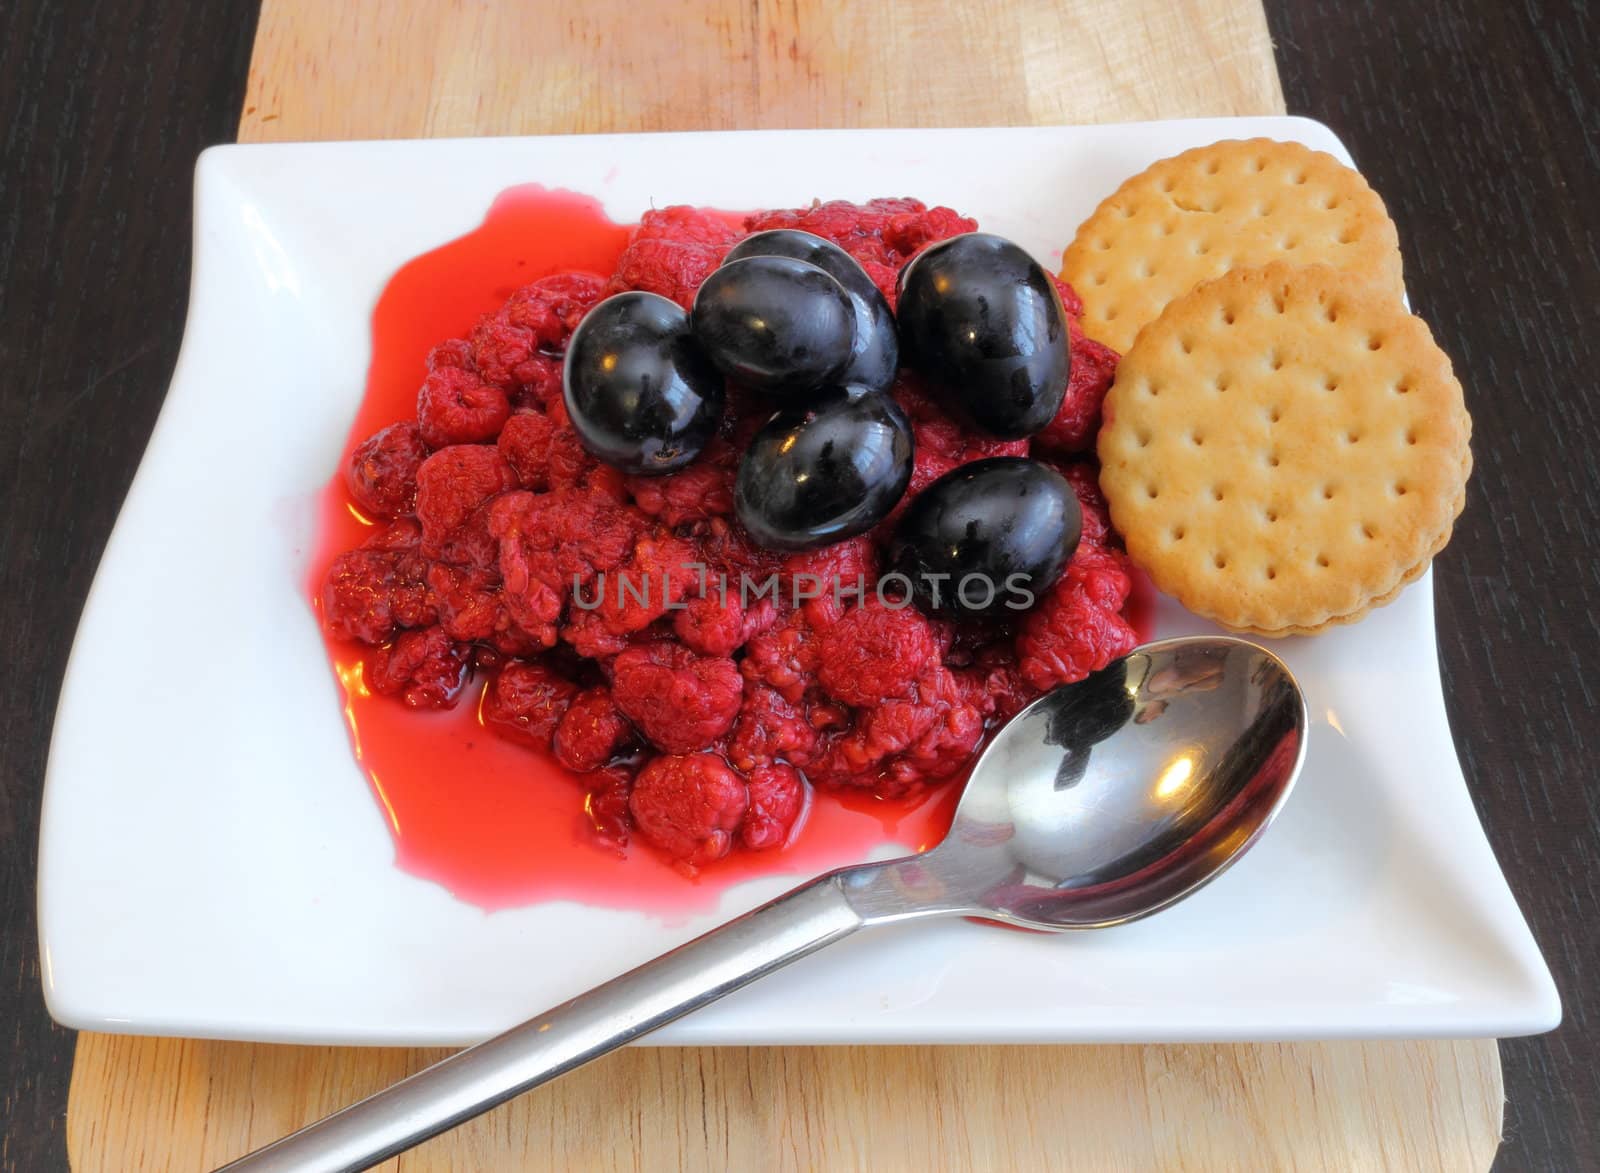 raspberry with grapes and biscuits by taviphoto